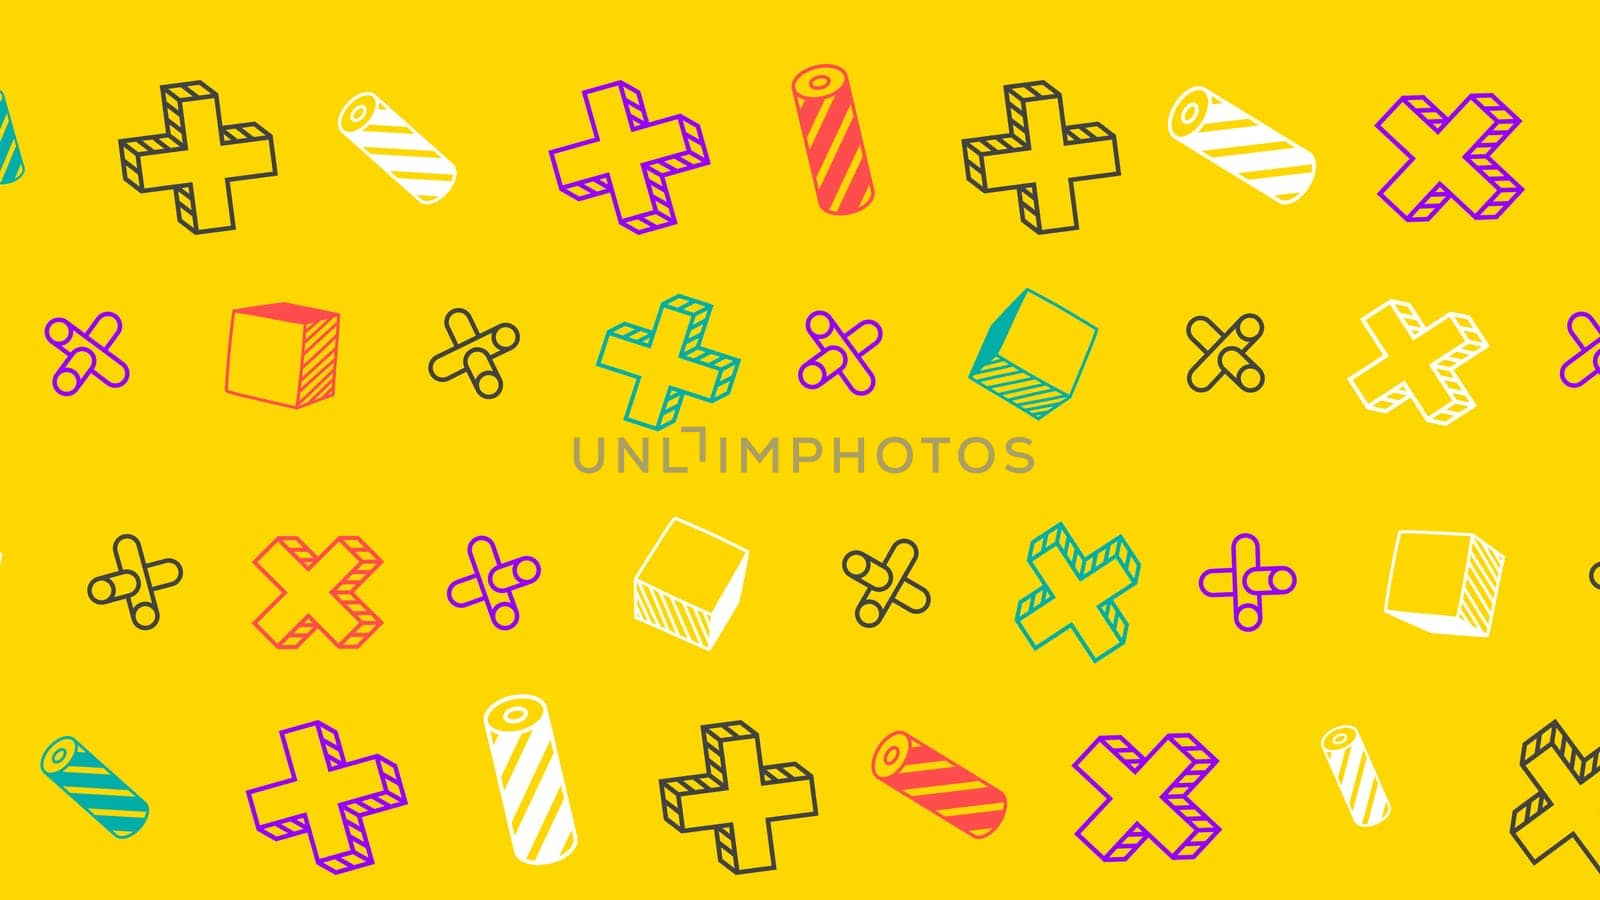 Memphis design abstract background. Random elements for your social media. Yellow background.